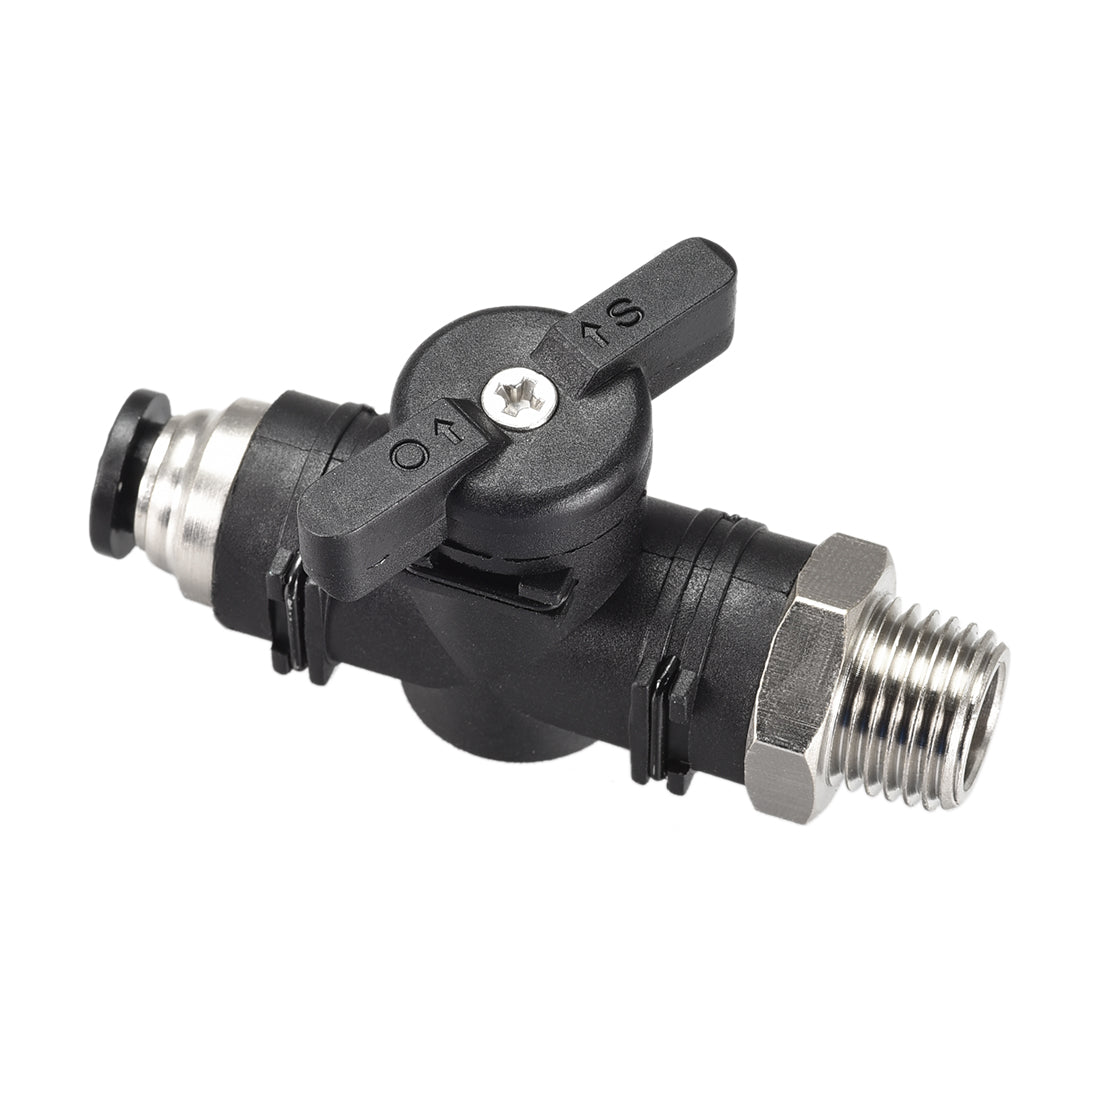 uxcell Uxcell Pneumatic Ball Valve, G1/4 to 6mm Inner Diameter, for Air Flow Control, Plastic Nickel Plated Brass Black